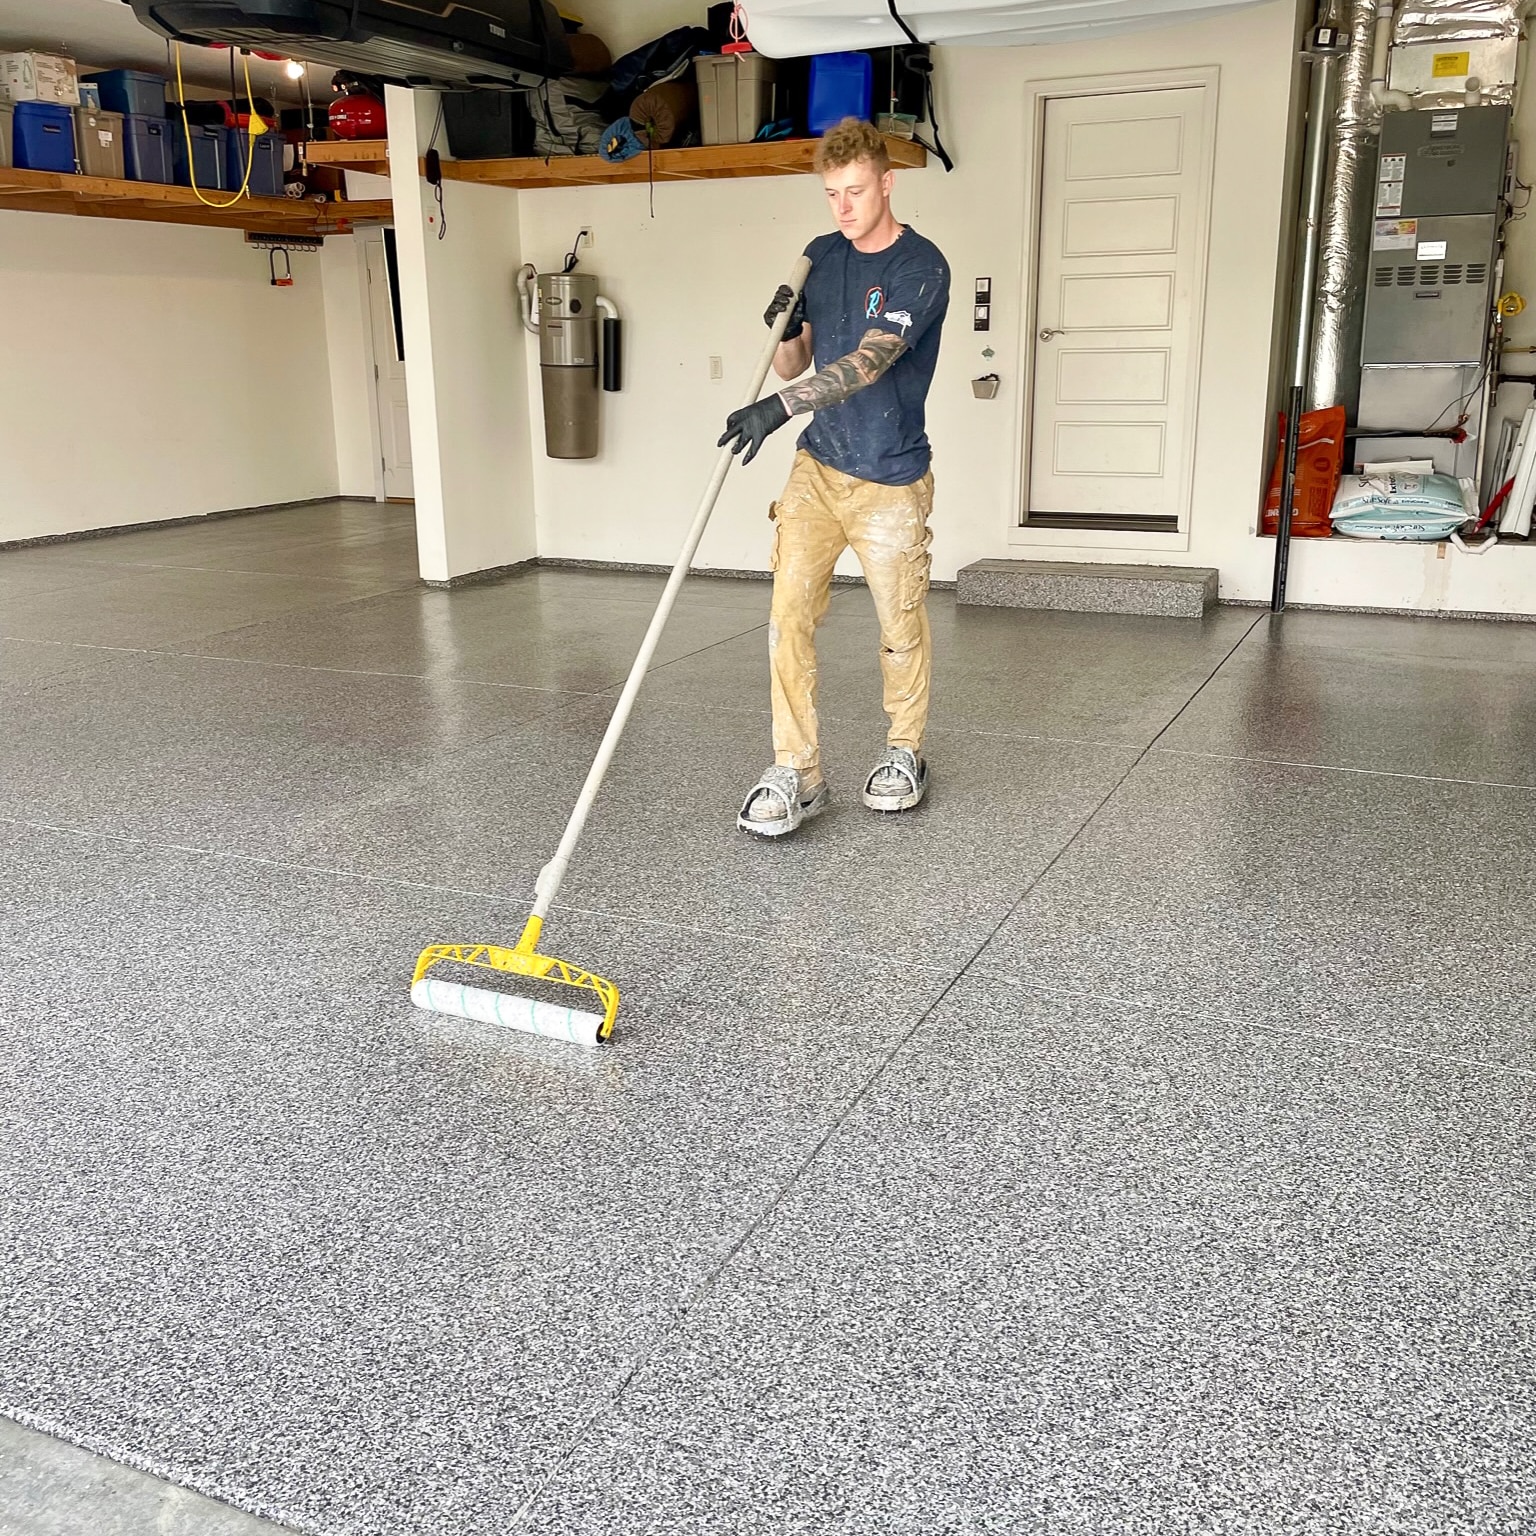 Roe Painting Employee Applying A Flakey Concrete Coating System To A Concrete Floor